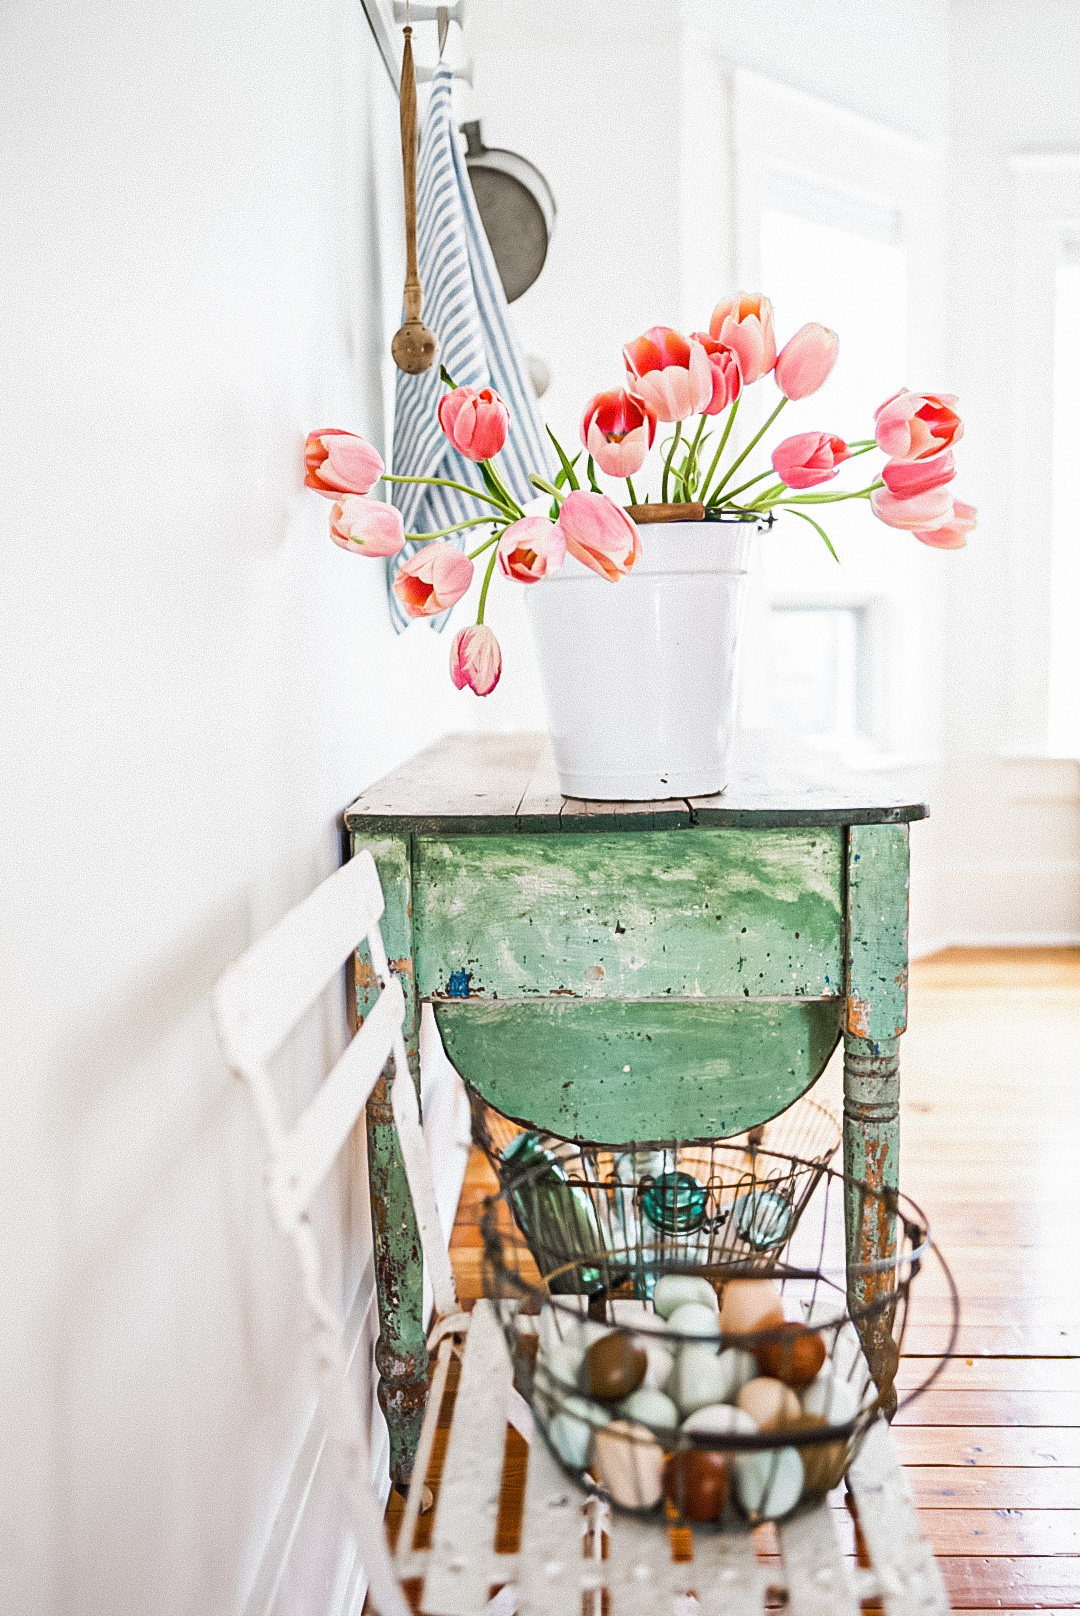 7 Tips for Adding Vintage Home Decor to Your Current Design Style